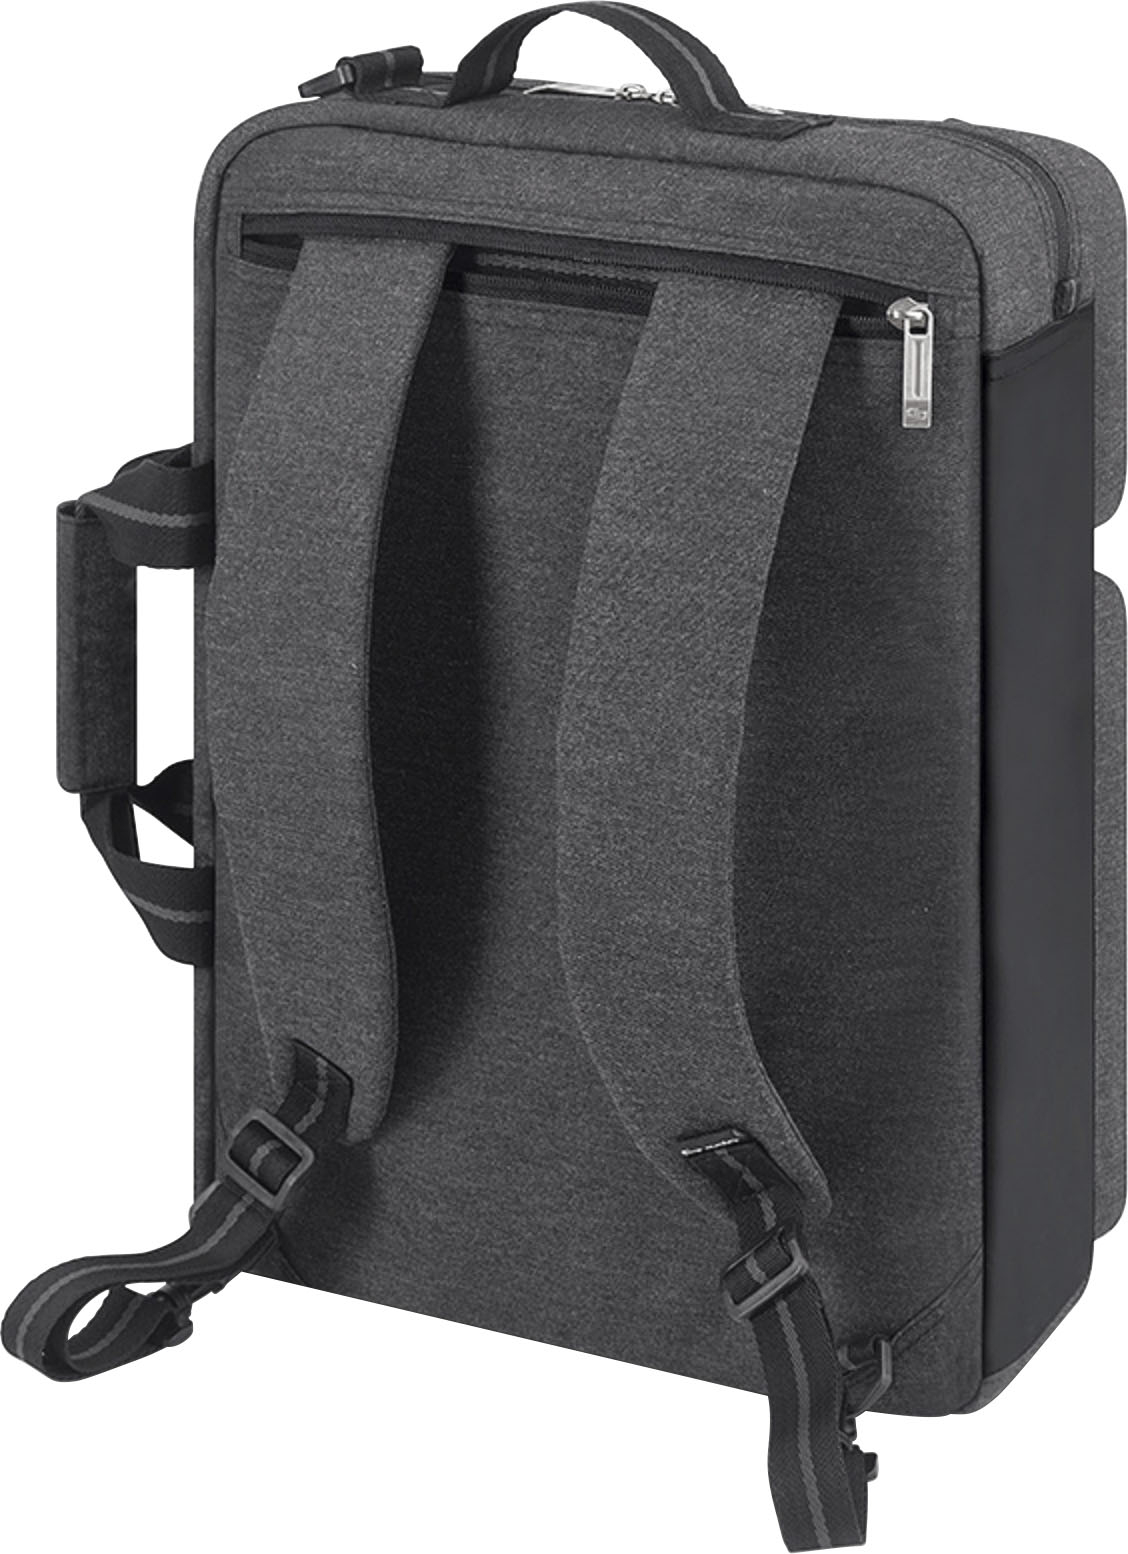 Back View: SwissGear - Synergy Backpack for 16" Laptop - Black/Gray